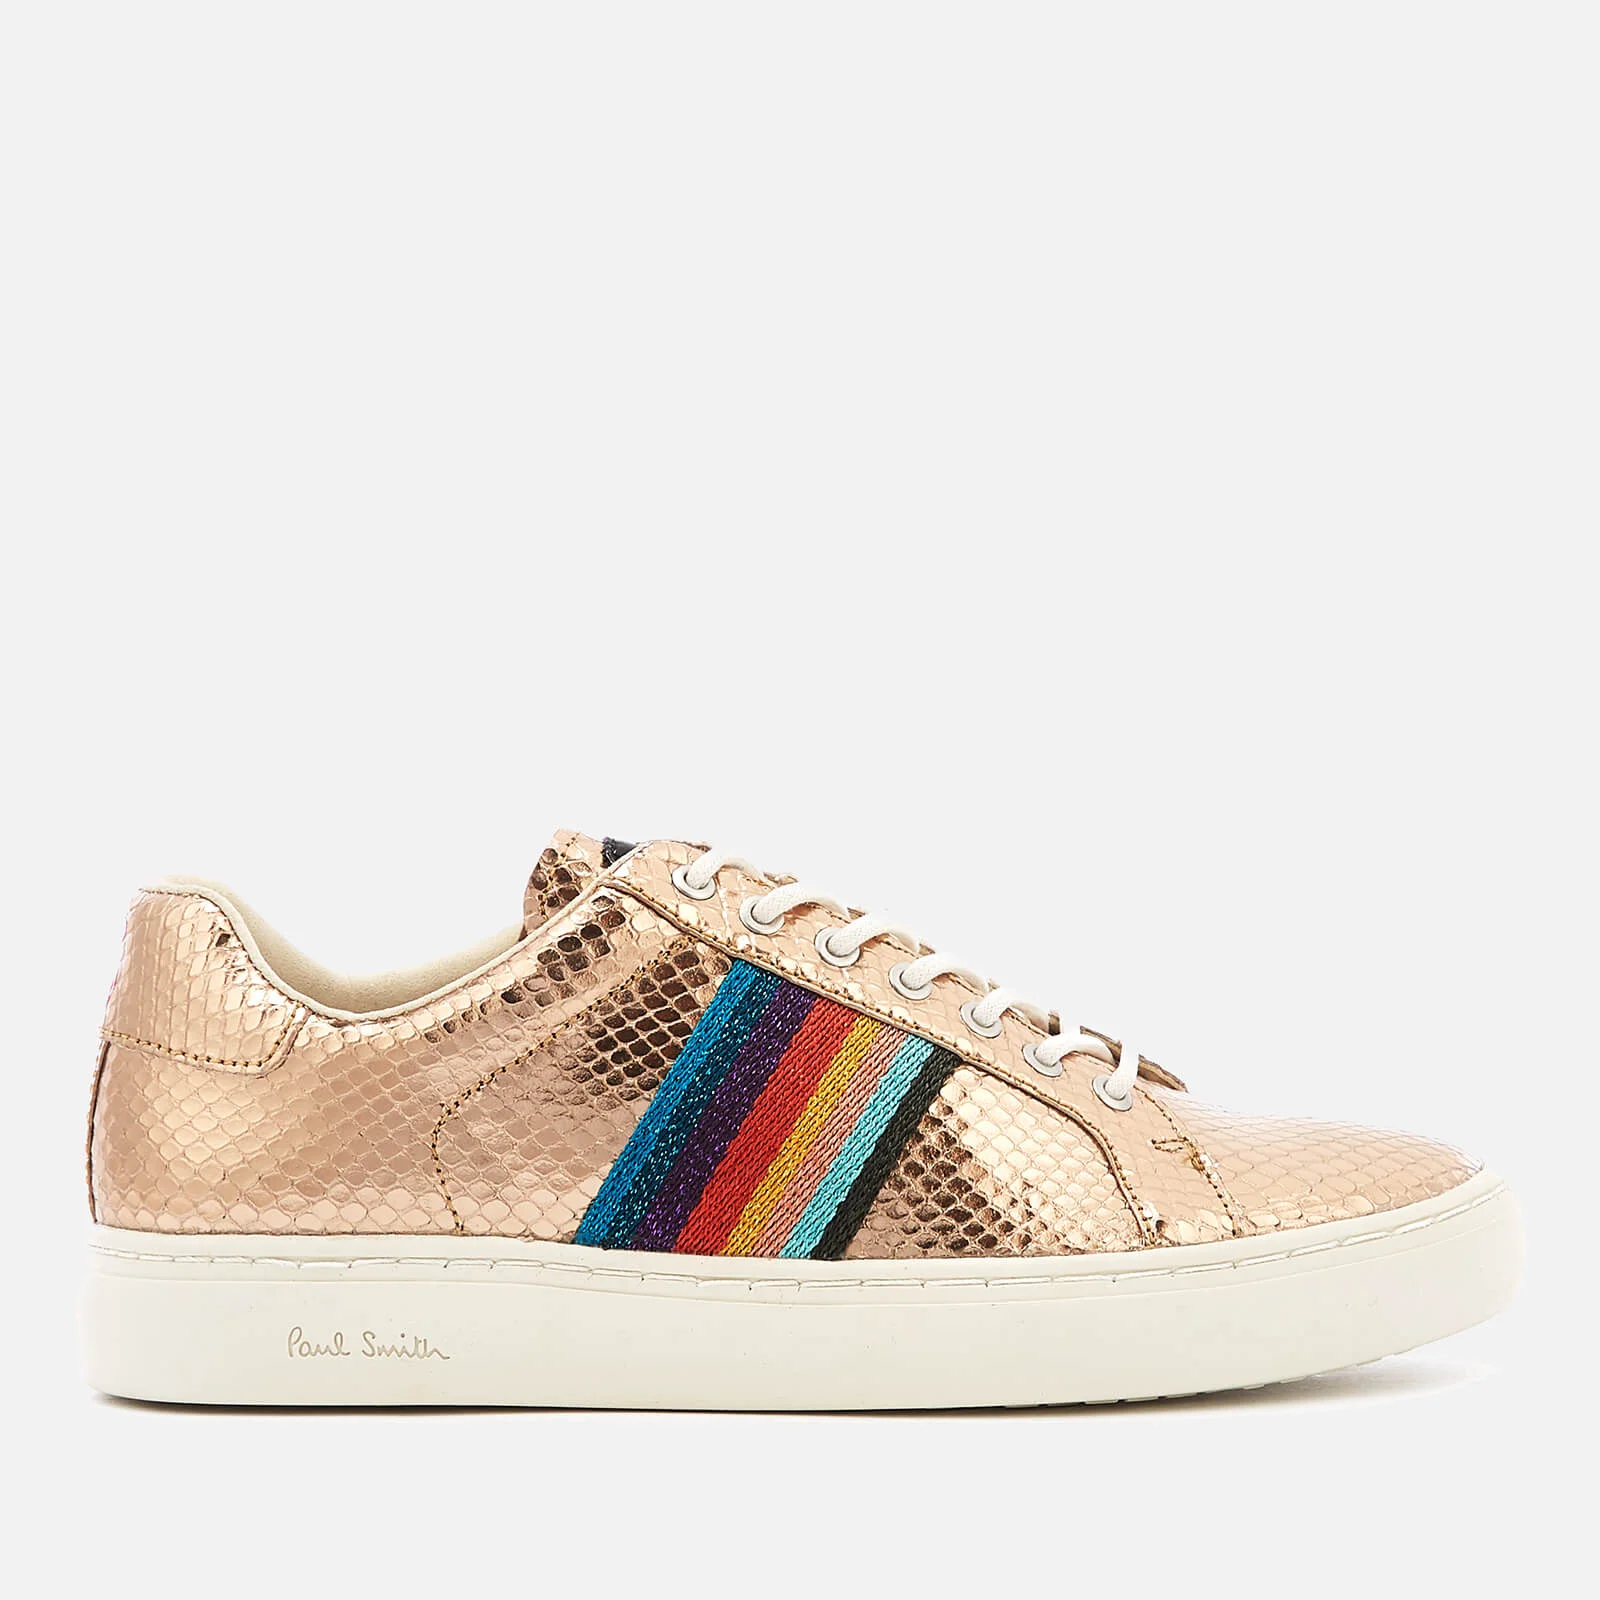 Paul Smith Women's Lapin Cupsole Trainers - Gold Image 1